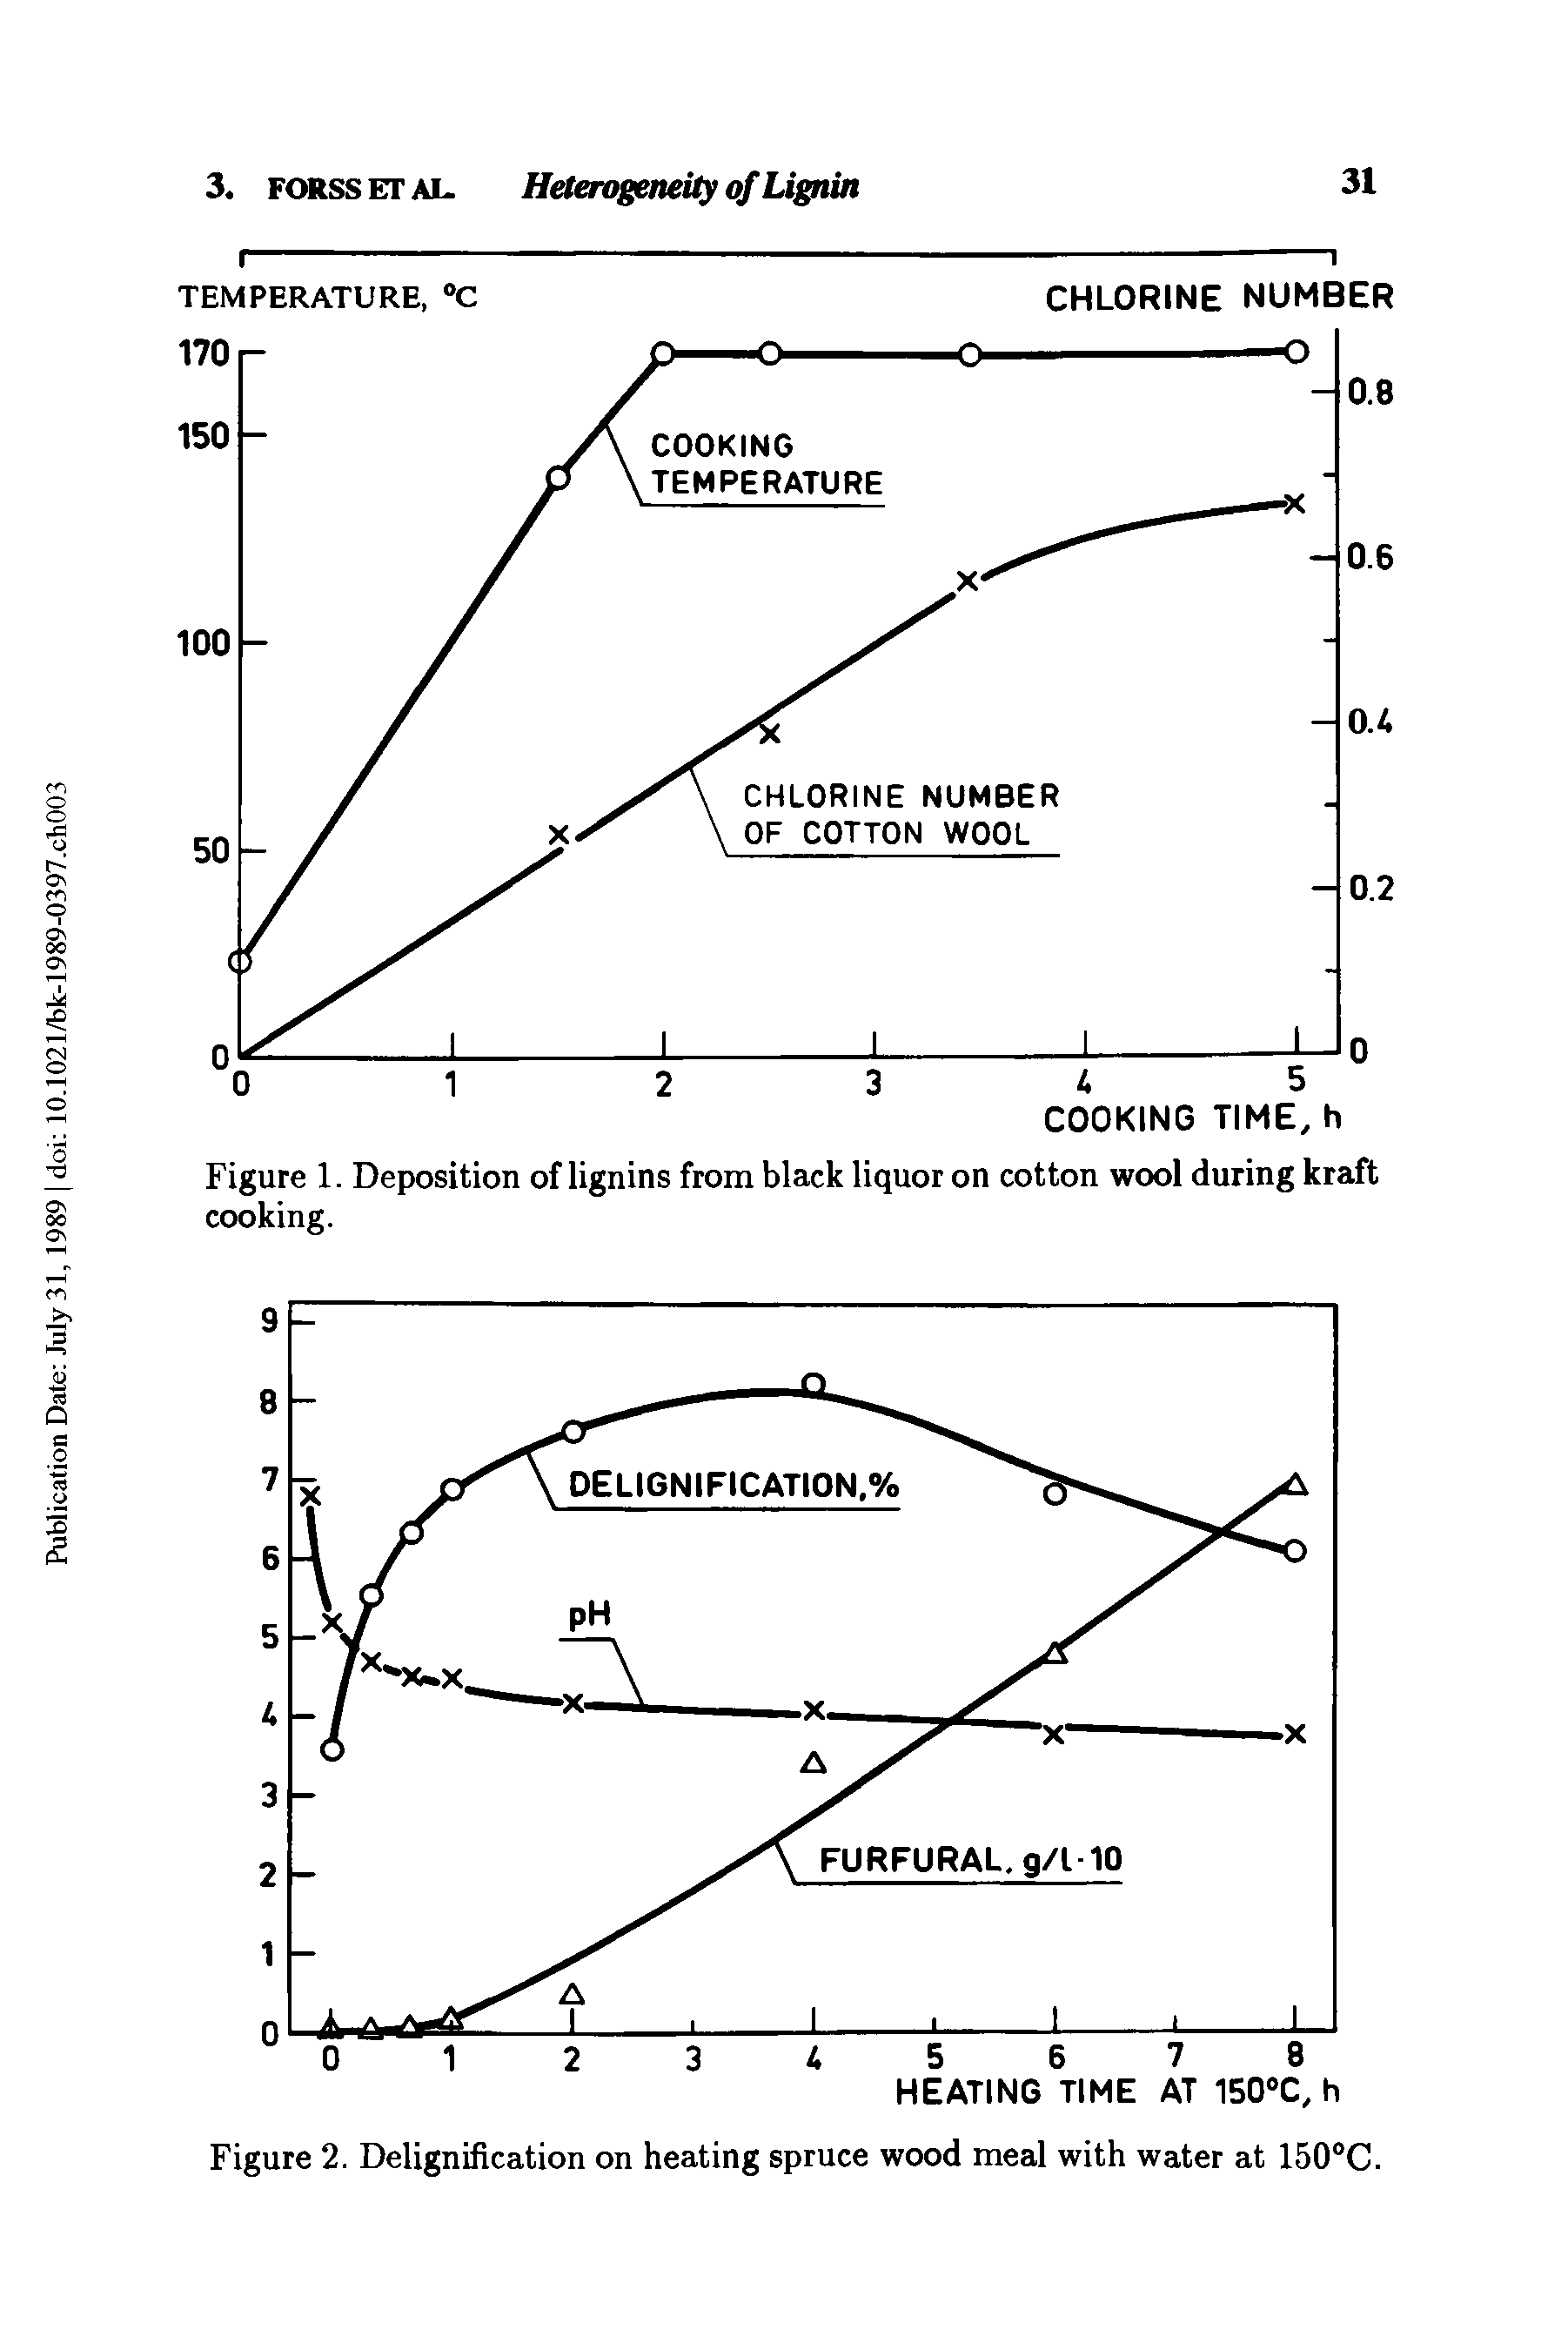 Figure 2. Delignification on heating spruce wood meal with water at 150°C.